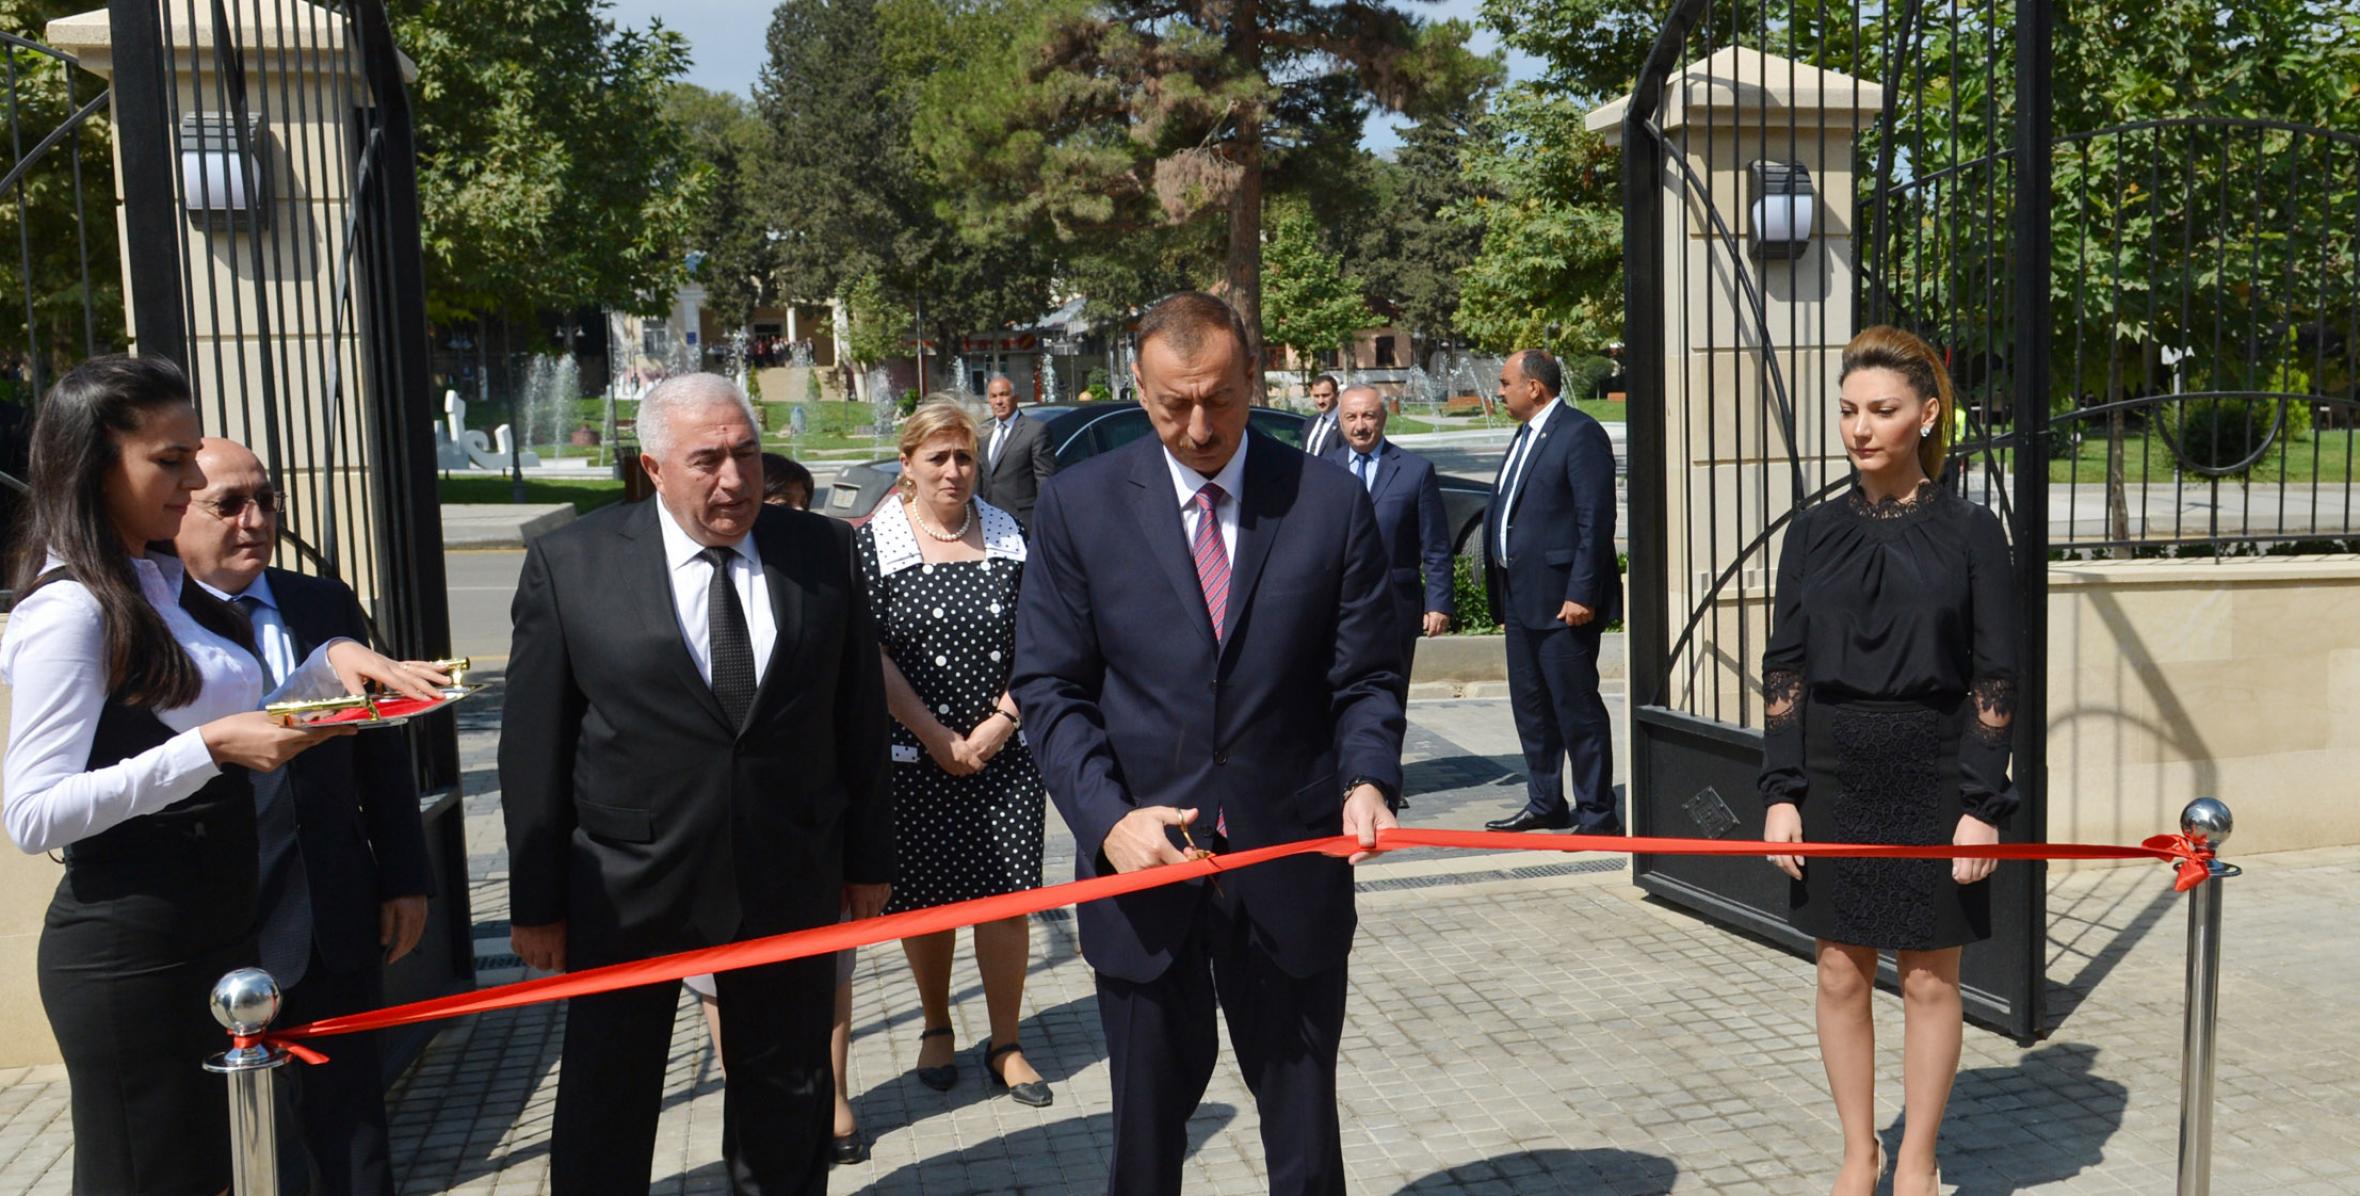 Ilham Aliyev attended the opening of an 80-seat Children's Academy for the Shamkir branch of Baku Oxford School